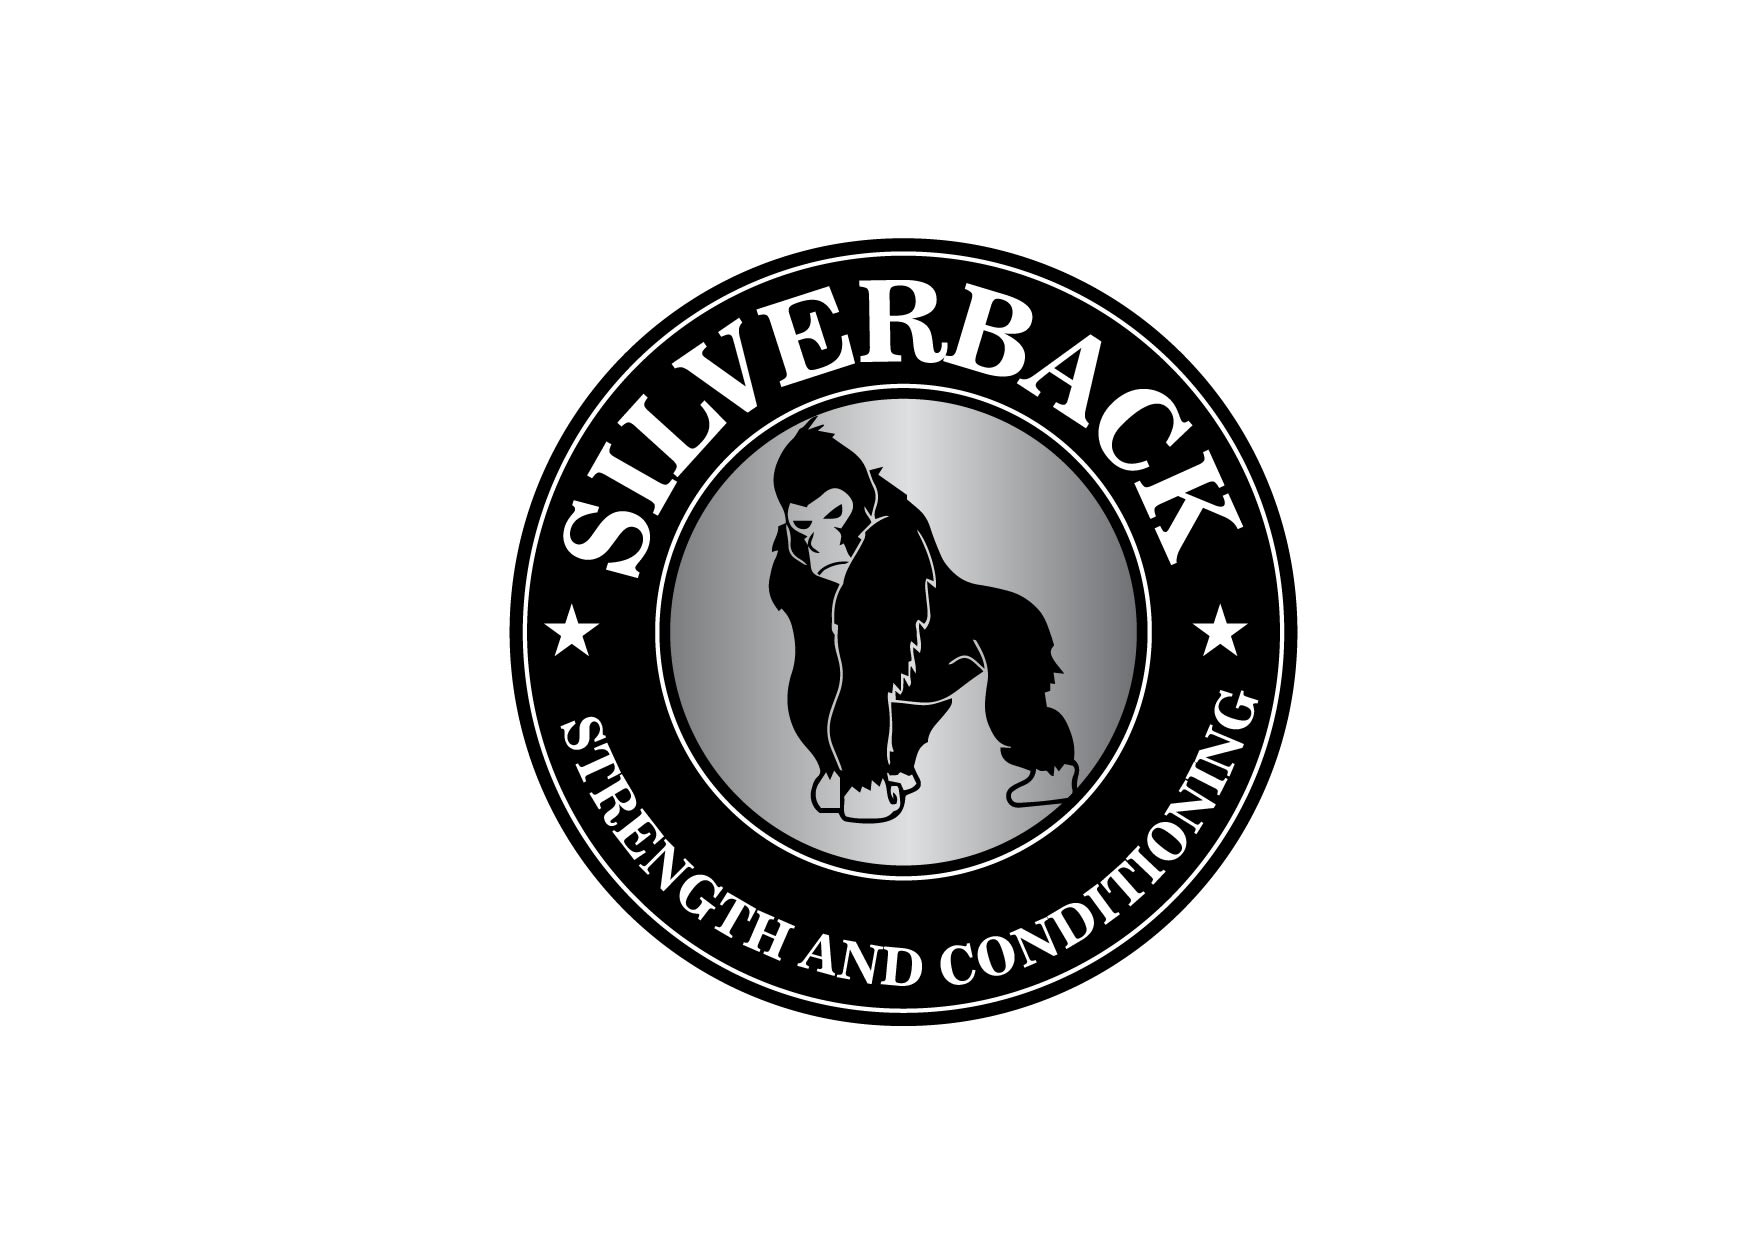 Silverback Strength & Conditioning